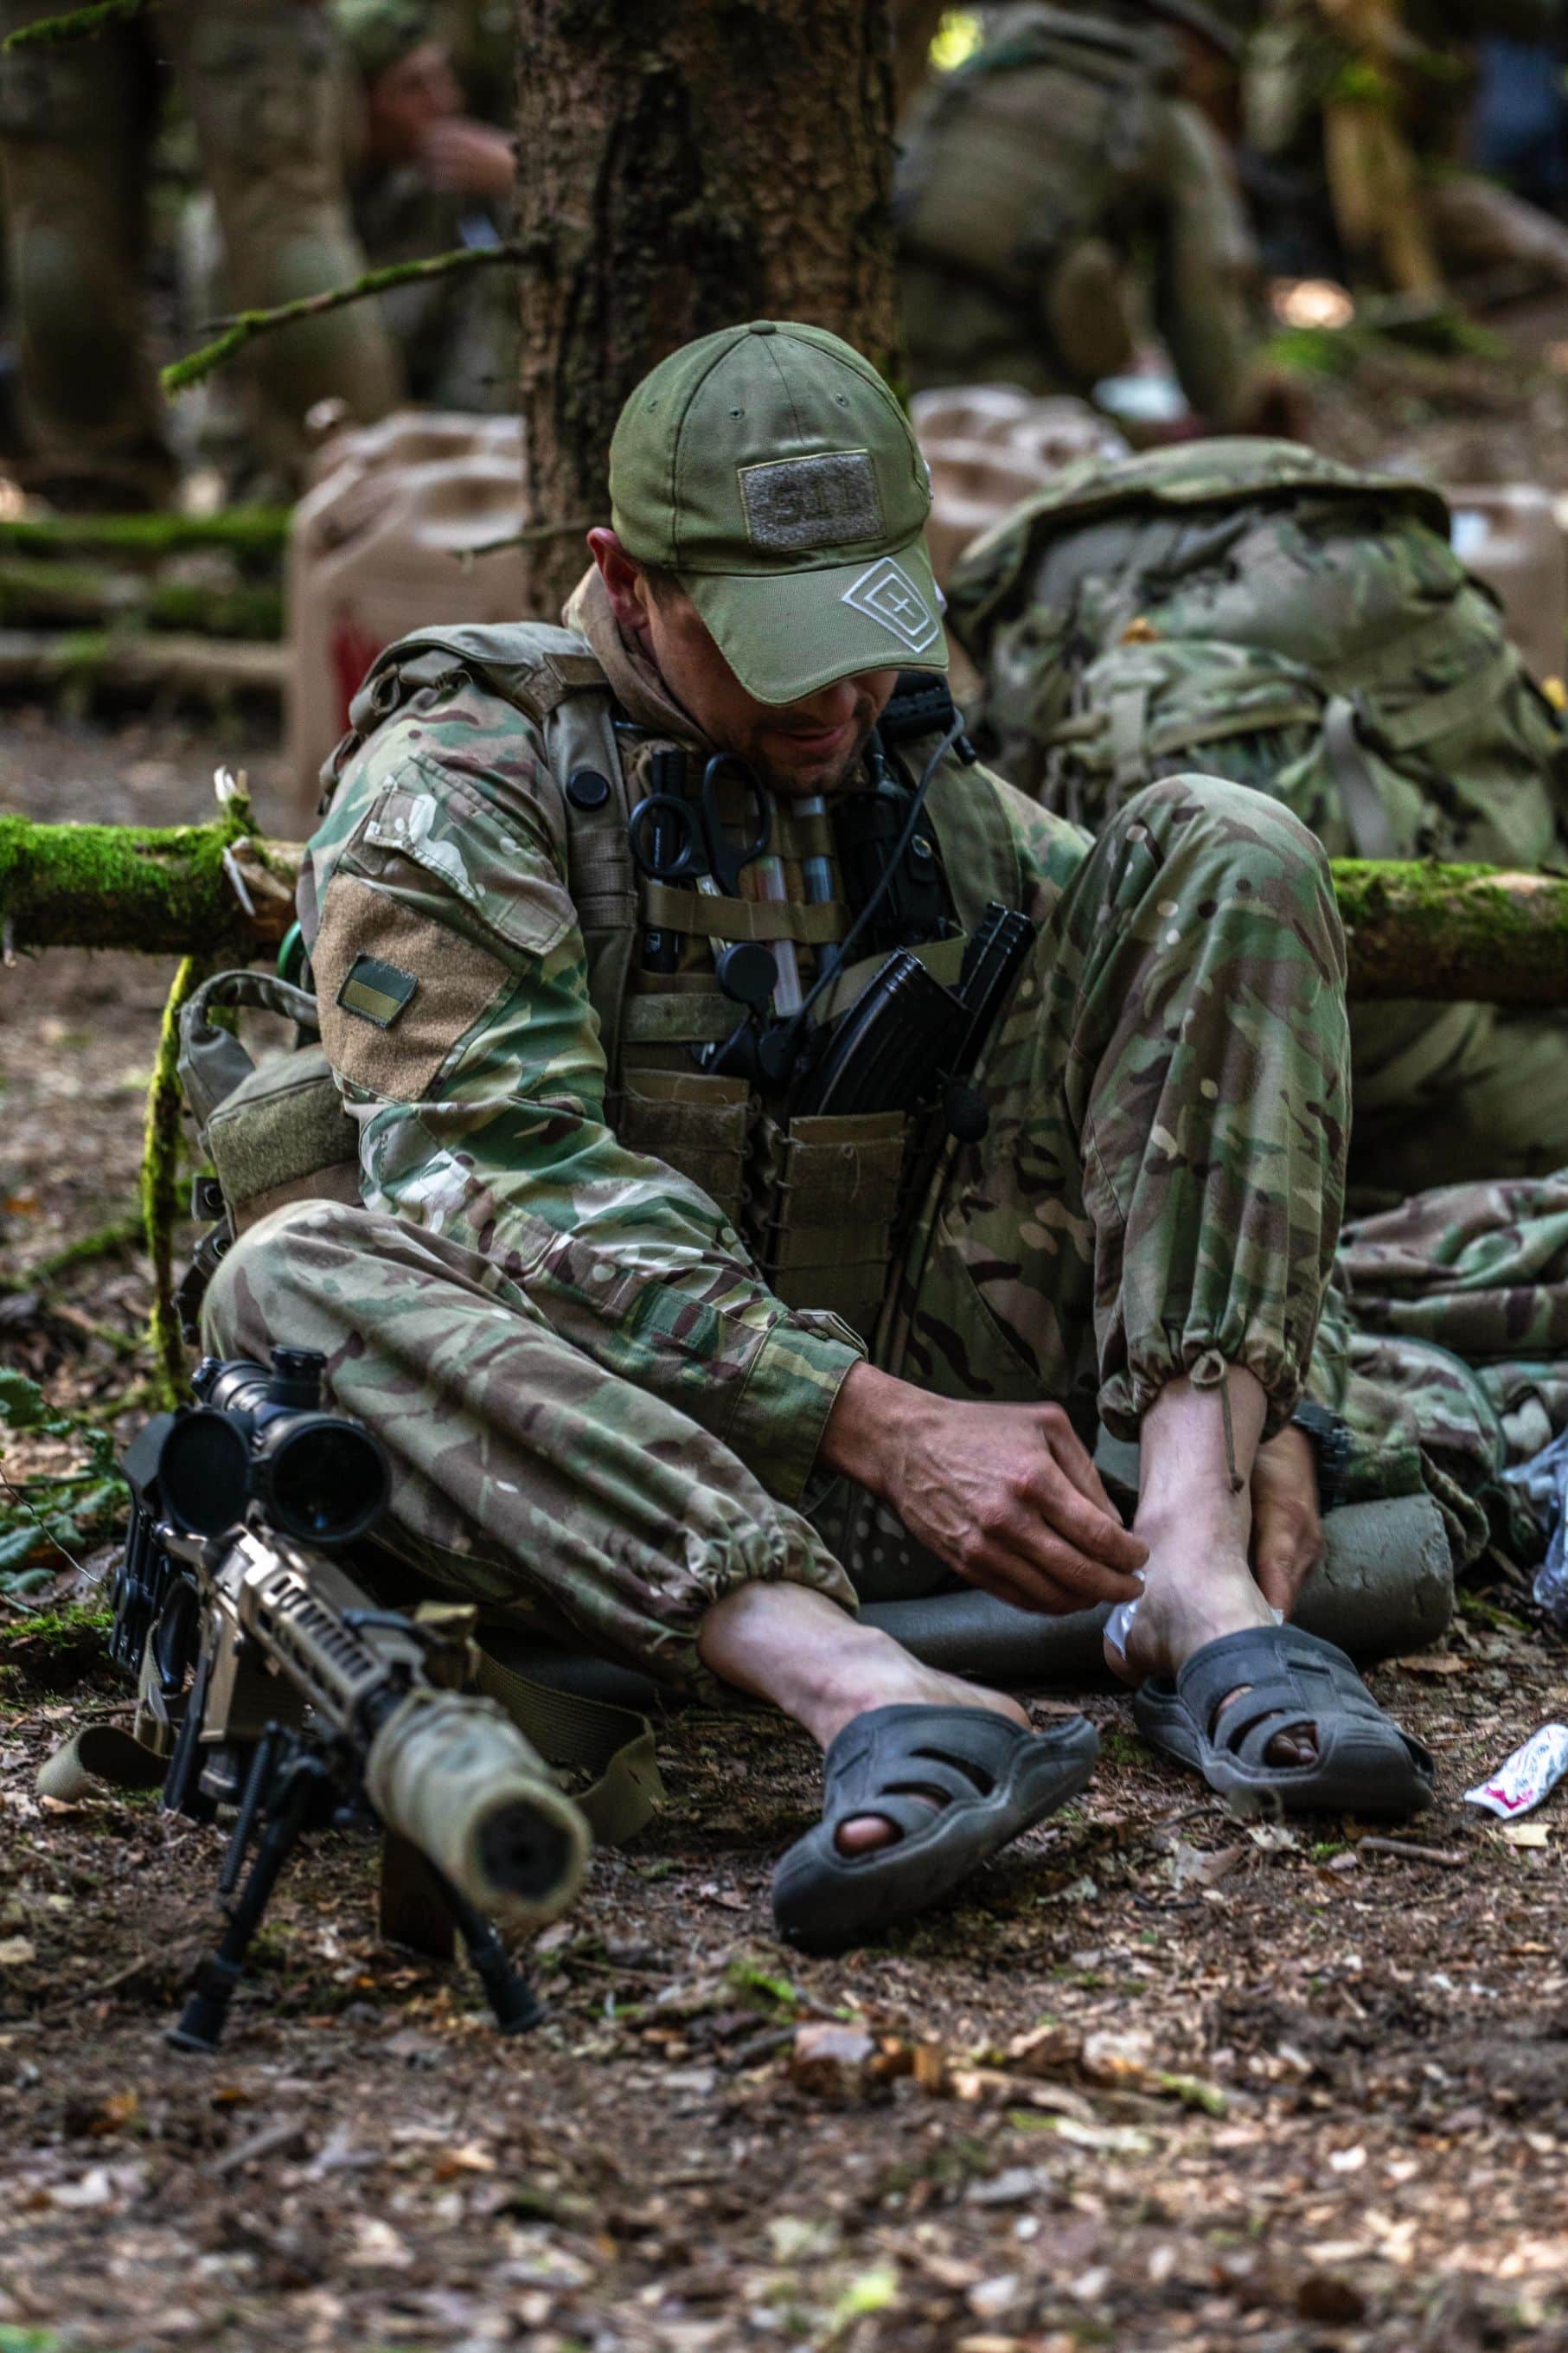 A Ukrainian special forces Soldier bandages his feet after a raid during Exercise Combined Resolve 14 at Hohenfels, Germany, September 18, 2020. Combined Resolve 14 partnered about 160 Multinational SOF from Ukraine, North Macedonian, the U.S., and members of the Lithuanian National Defense Volunteer Defense National Force, or KASP, with conventional forces to improve integration and enhance their overall combat abilities. (U.S. Army photo by Sgt Patrik Orcutt)